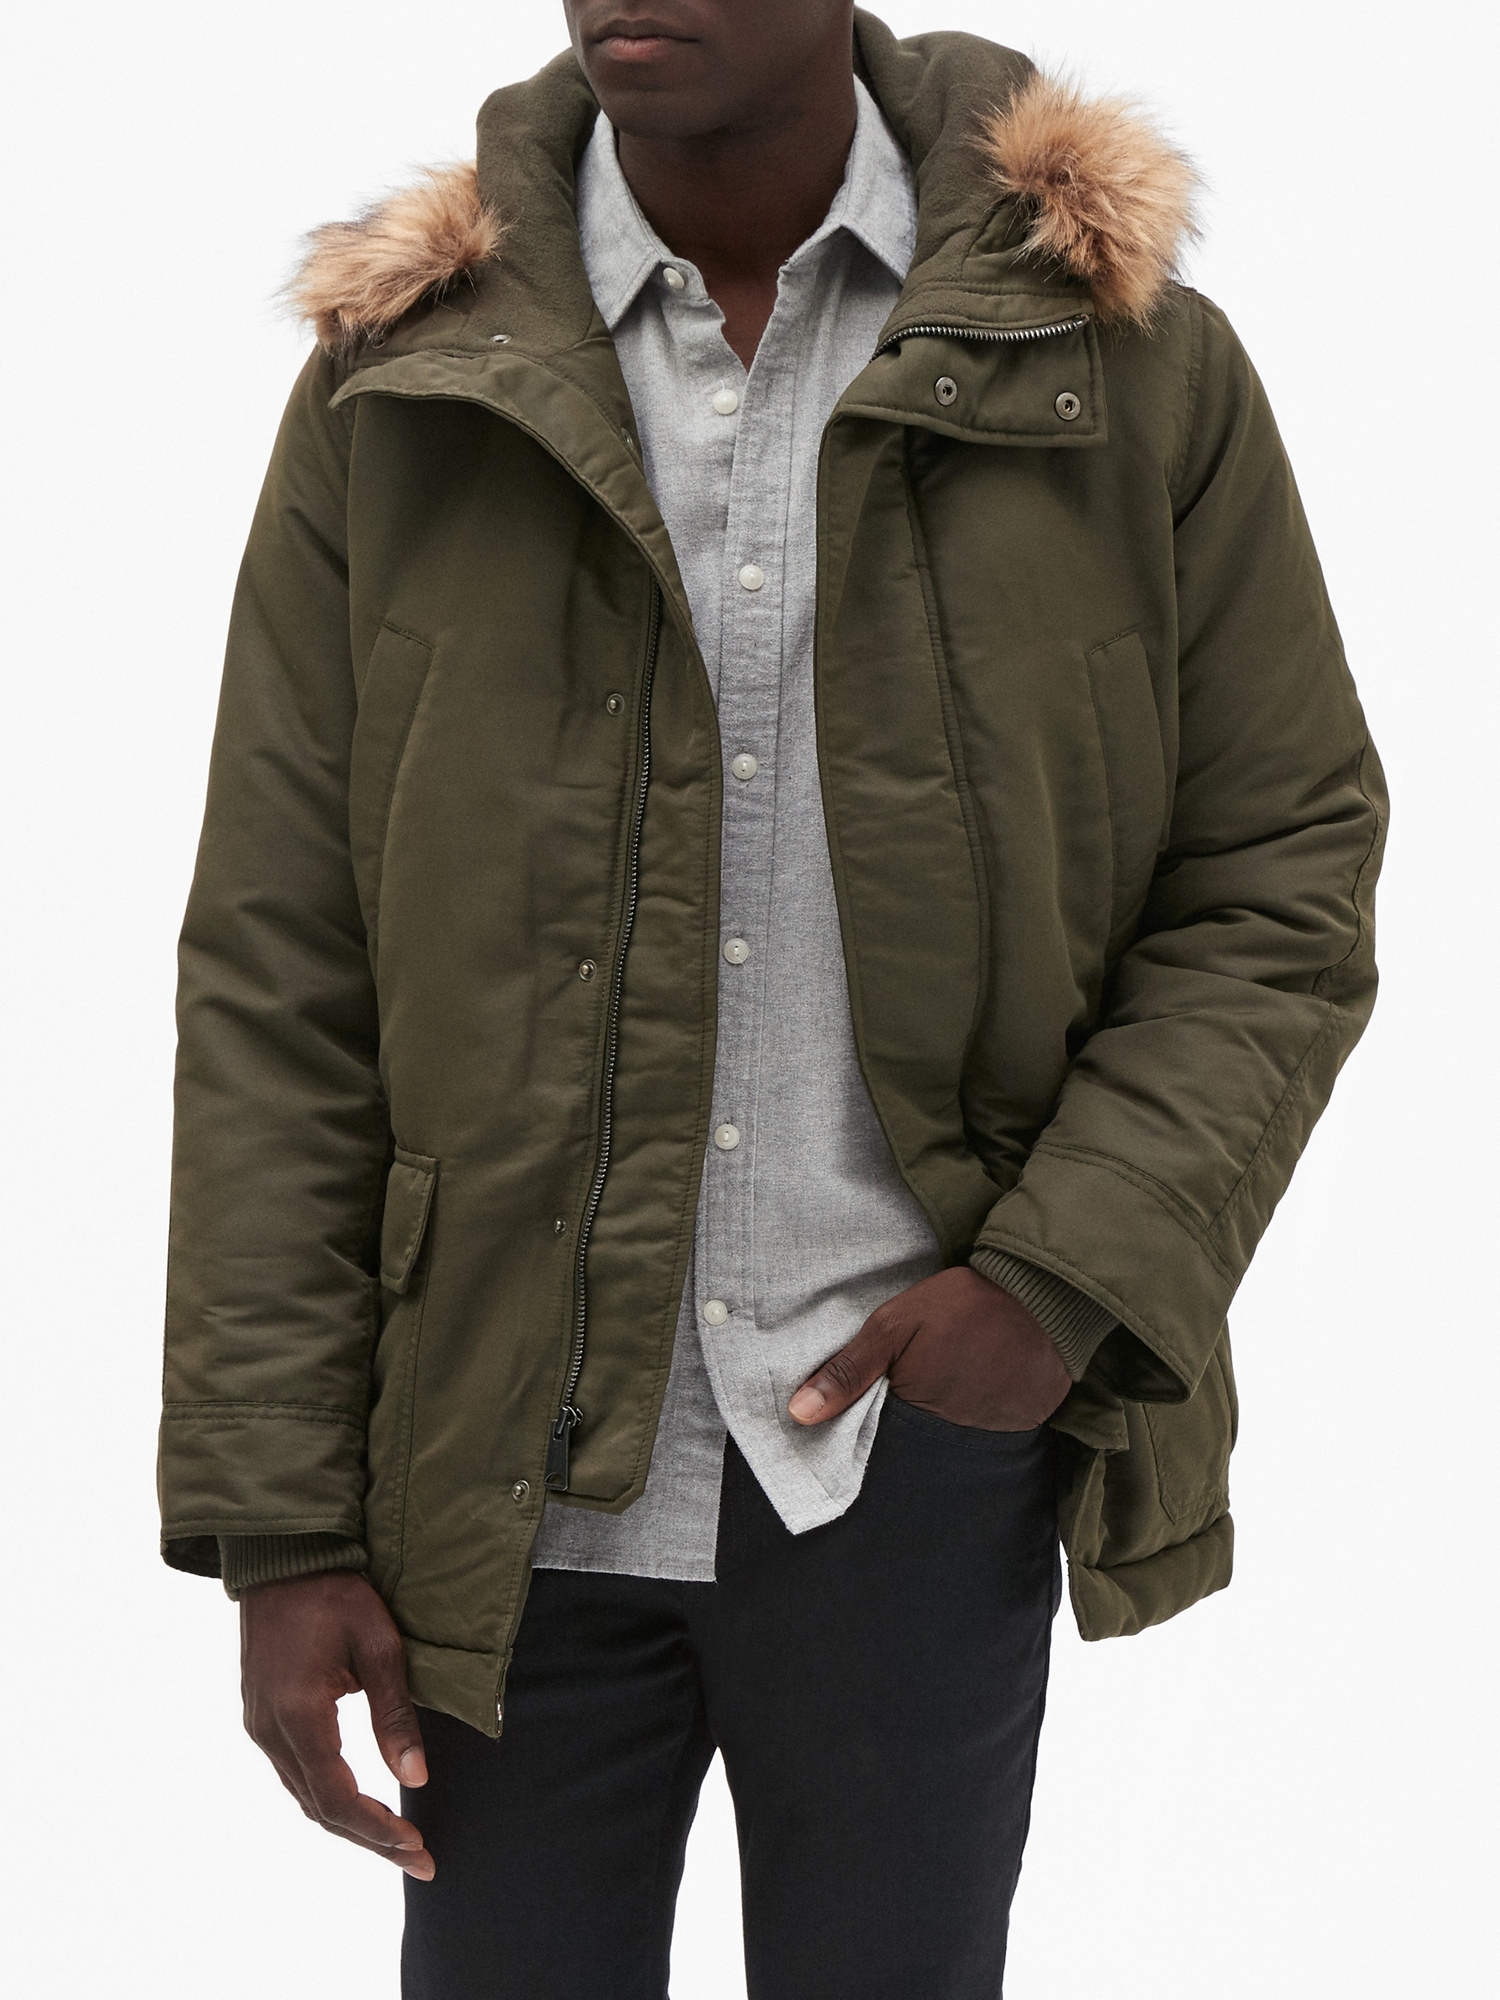 Hooded Parka Jacket with Faux-Fur Trim | Gap Factory